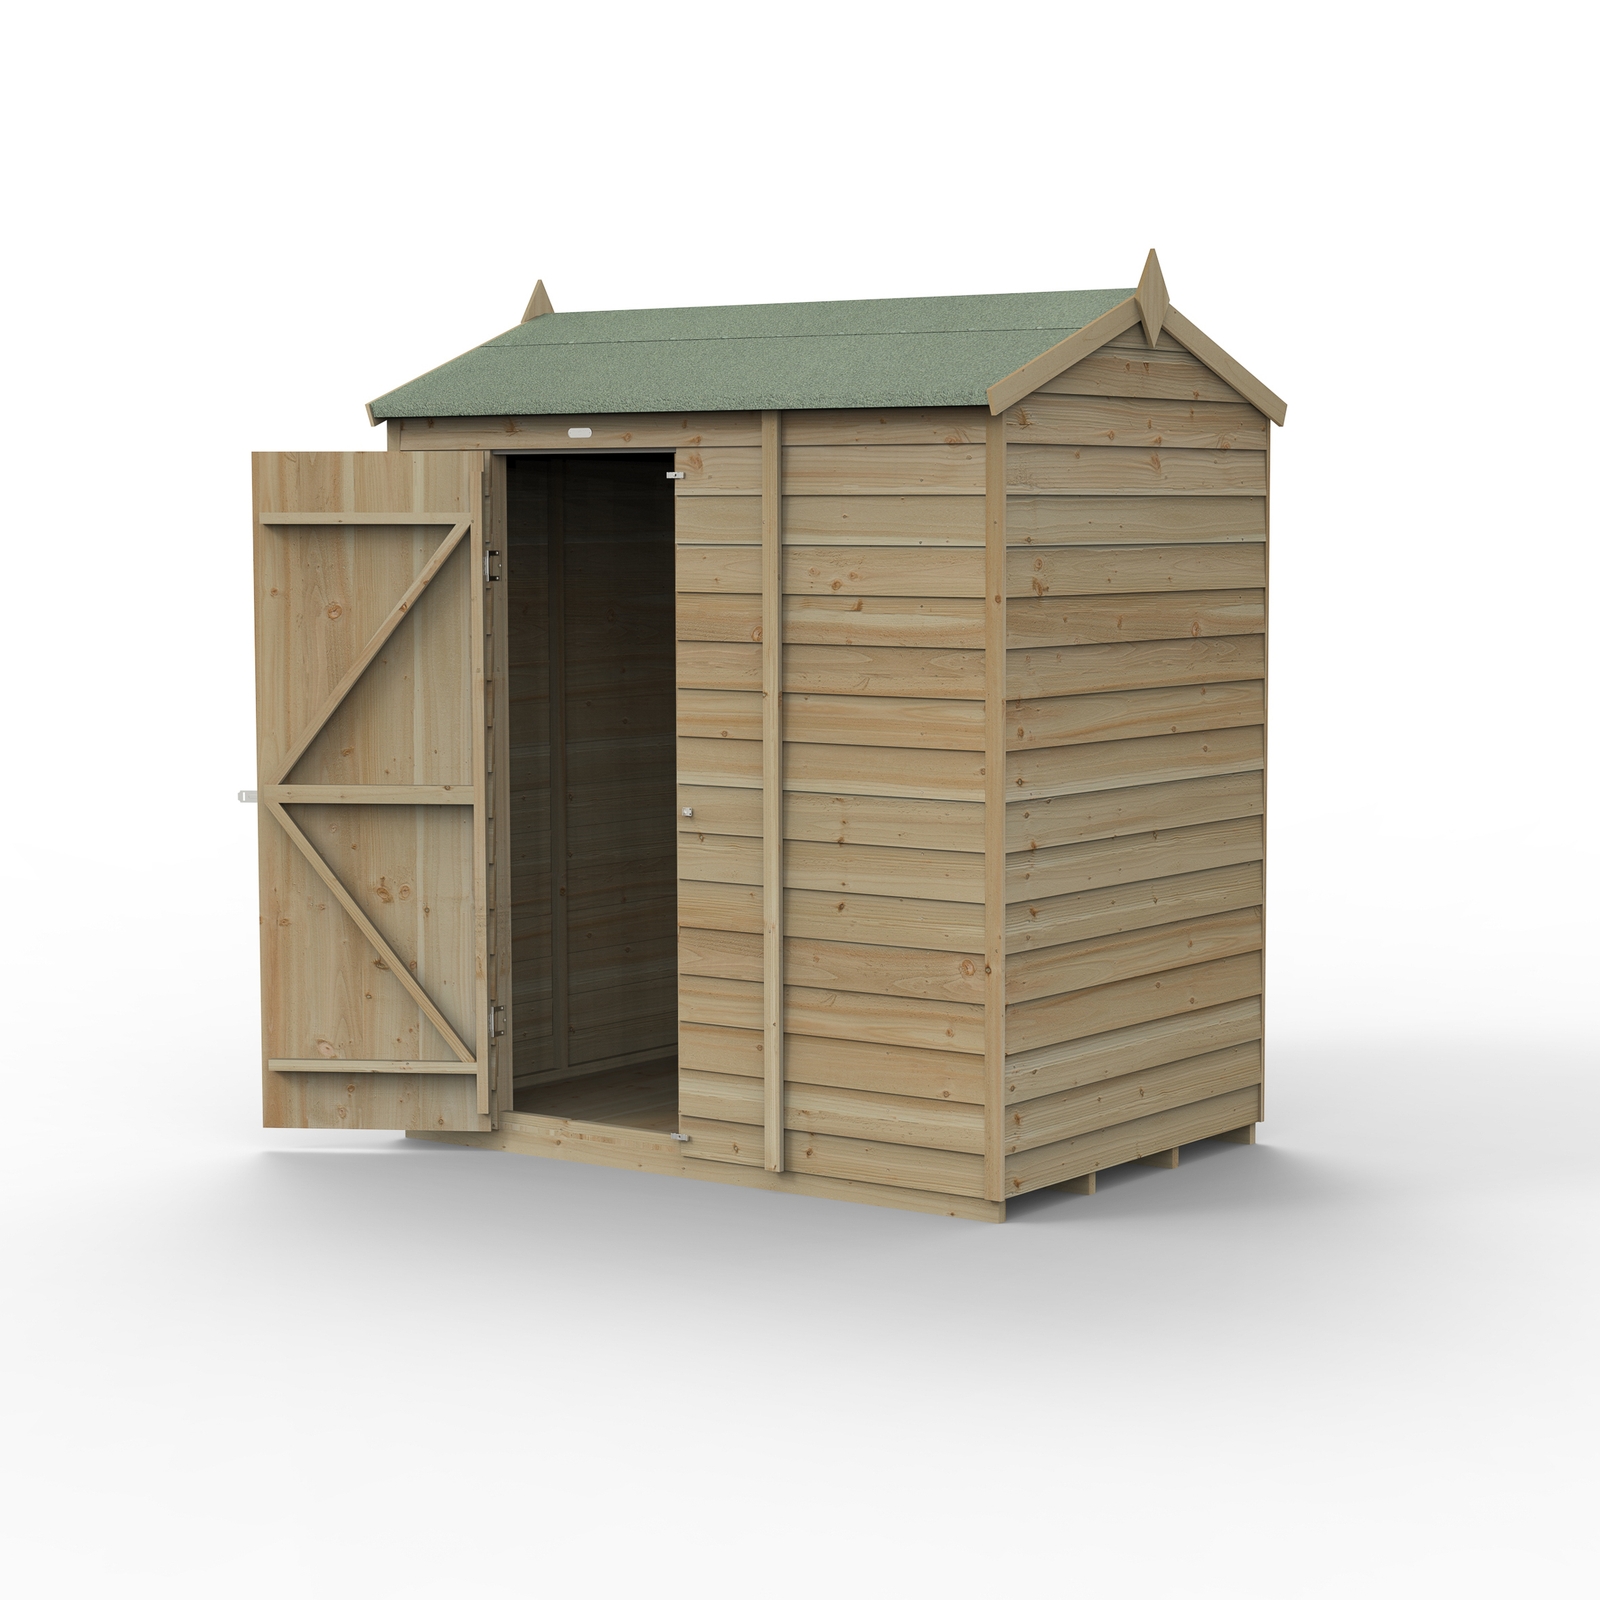 Forest Garden 4LIFE Reverse Apex Shed 6 x 4ft - Single Door No Window (Home Delivery)